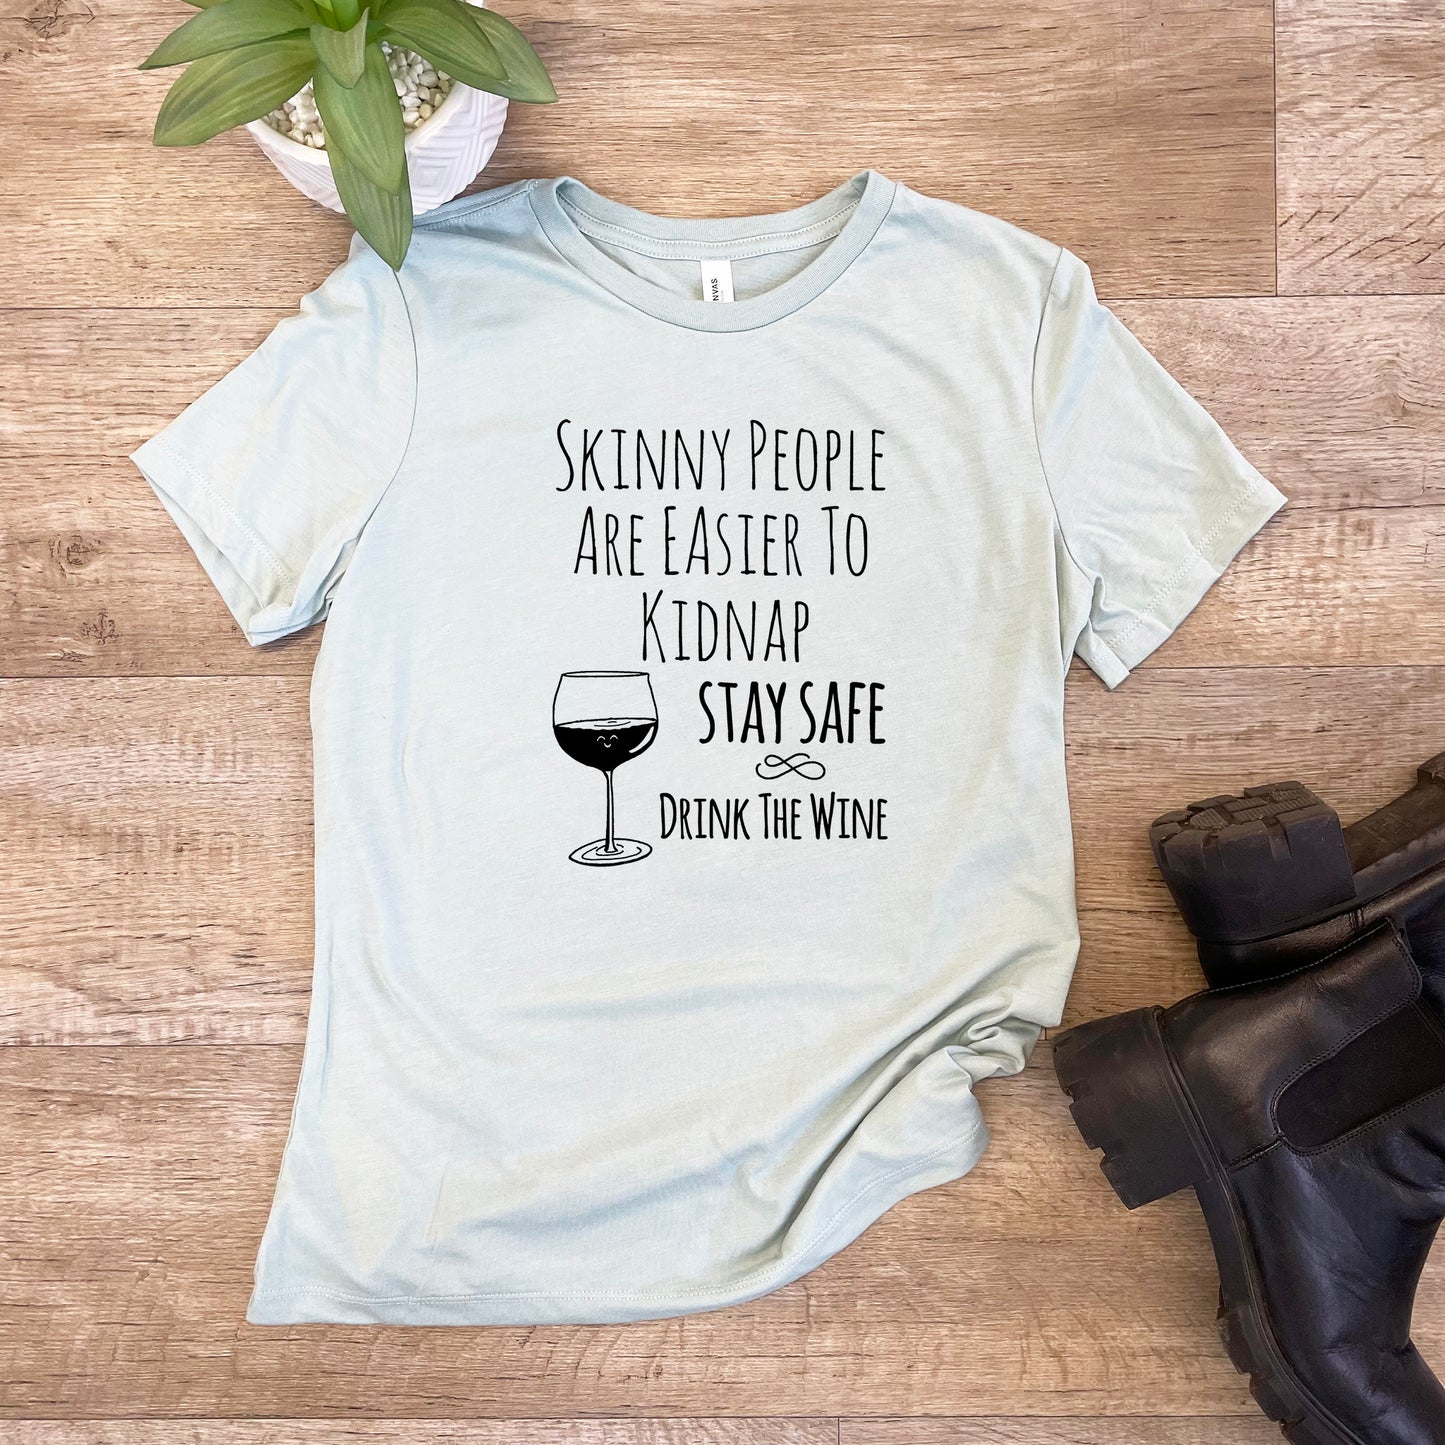 Skinny People Are Easier To Kidnap. Stay Safe. Drink The Wine - Women's Crew Tee - Olive or Dusty Blue